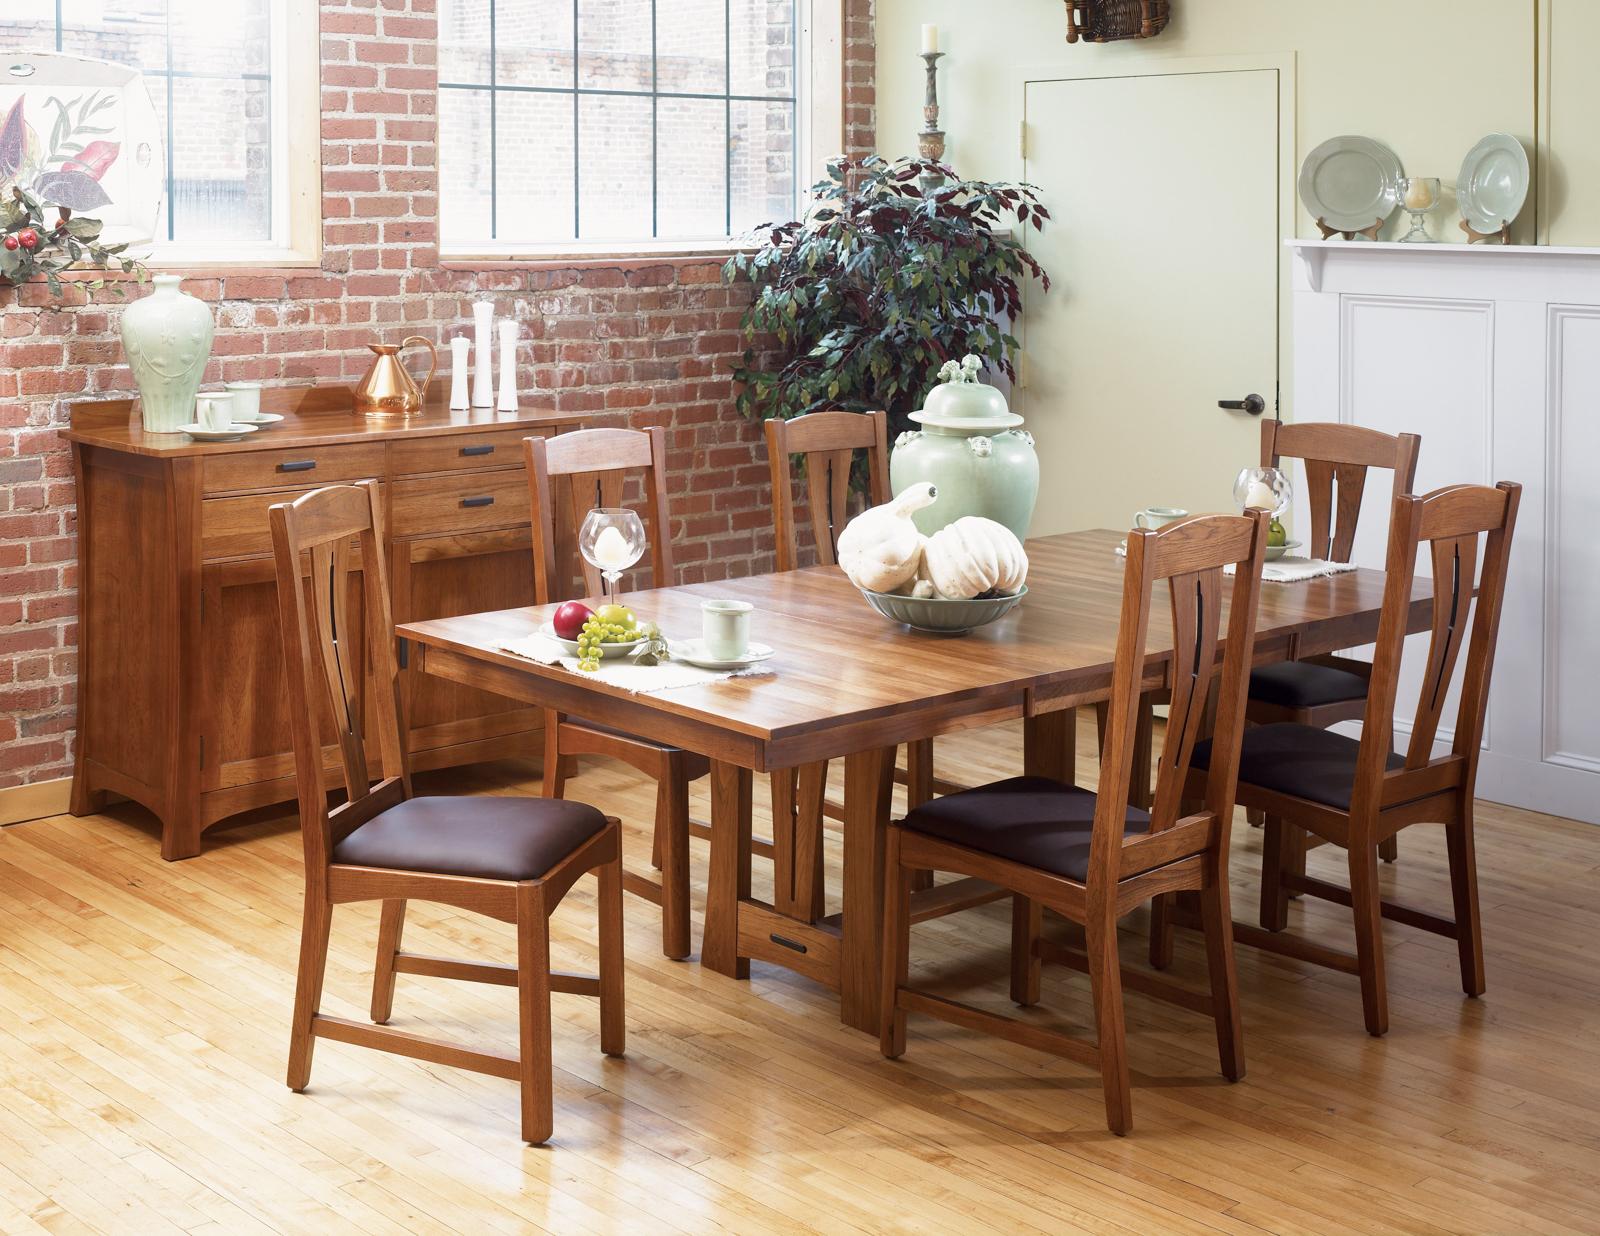 Rustic Dining Table Cattail Bungalow CATAM6300 in Amber 